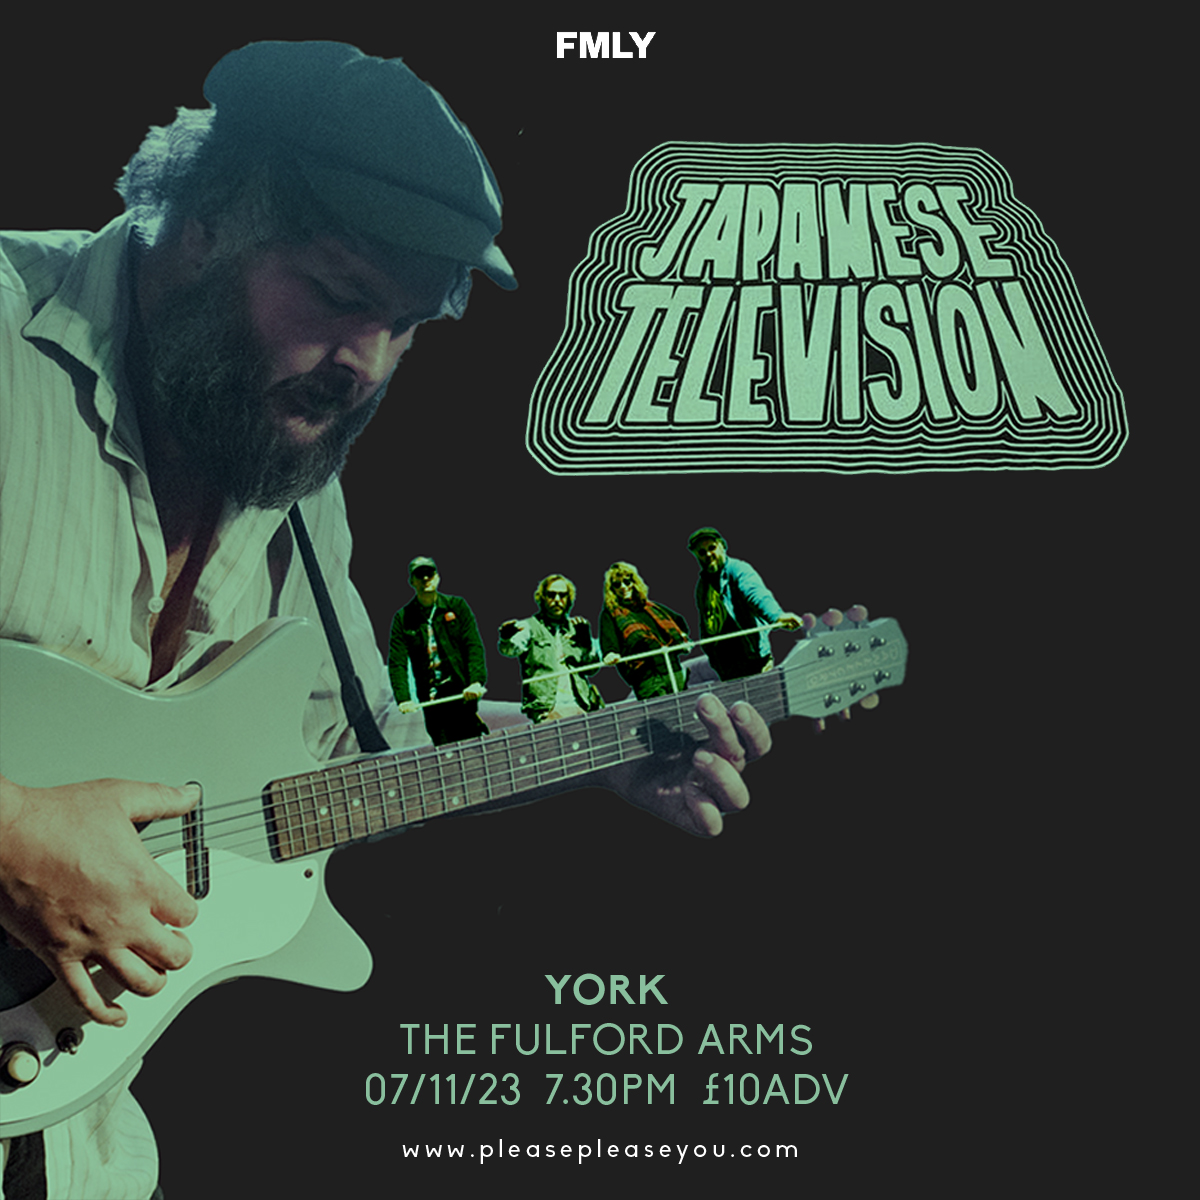 Incoming! Ace London space-surf band @JapaneseTVband are coming to York! Fresh from touring with GOAT & The Wytches, expect a well honed, full-throttle blend of psych, surf, sci-fi and garage rock in @fulfordarmsyork 07/11. >> pleasepleaseyou.com